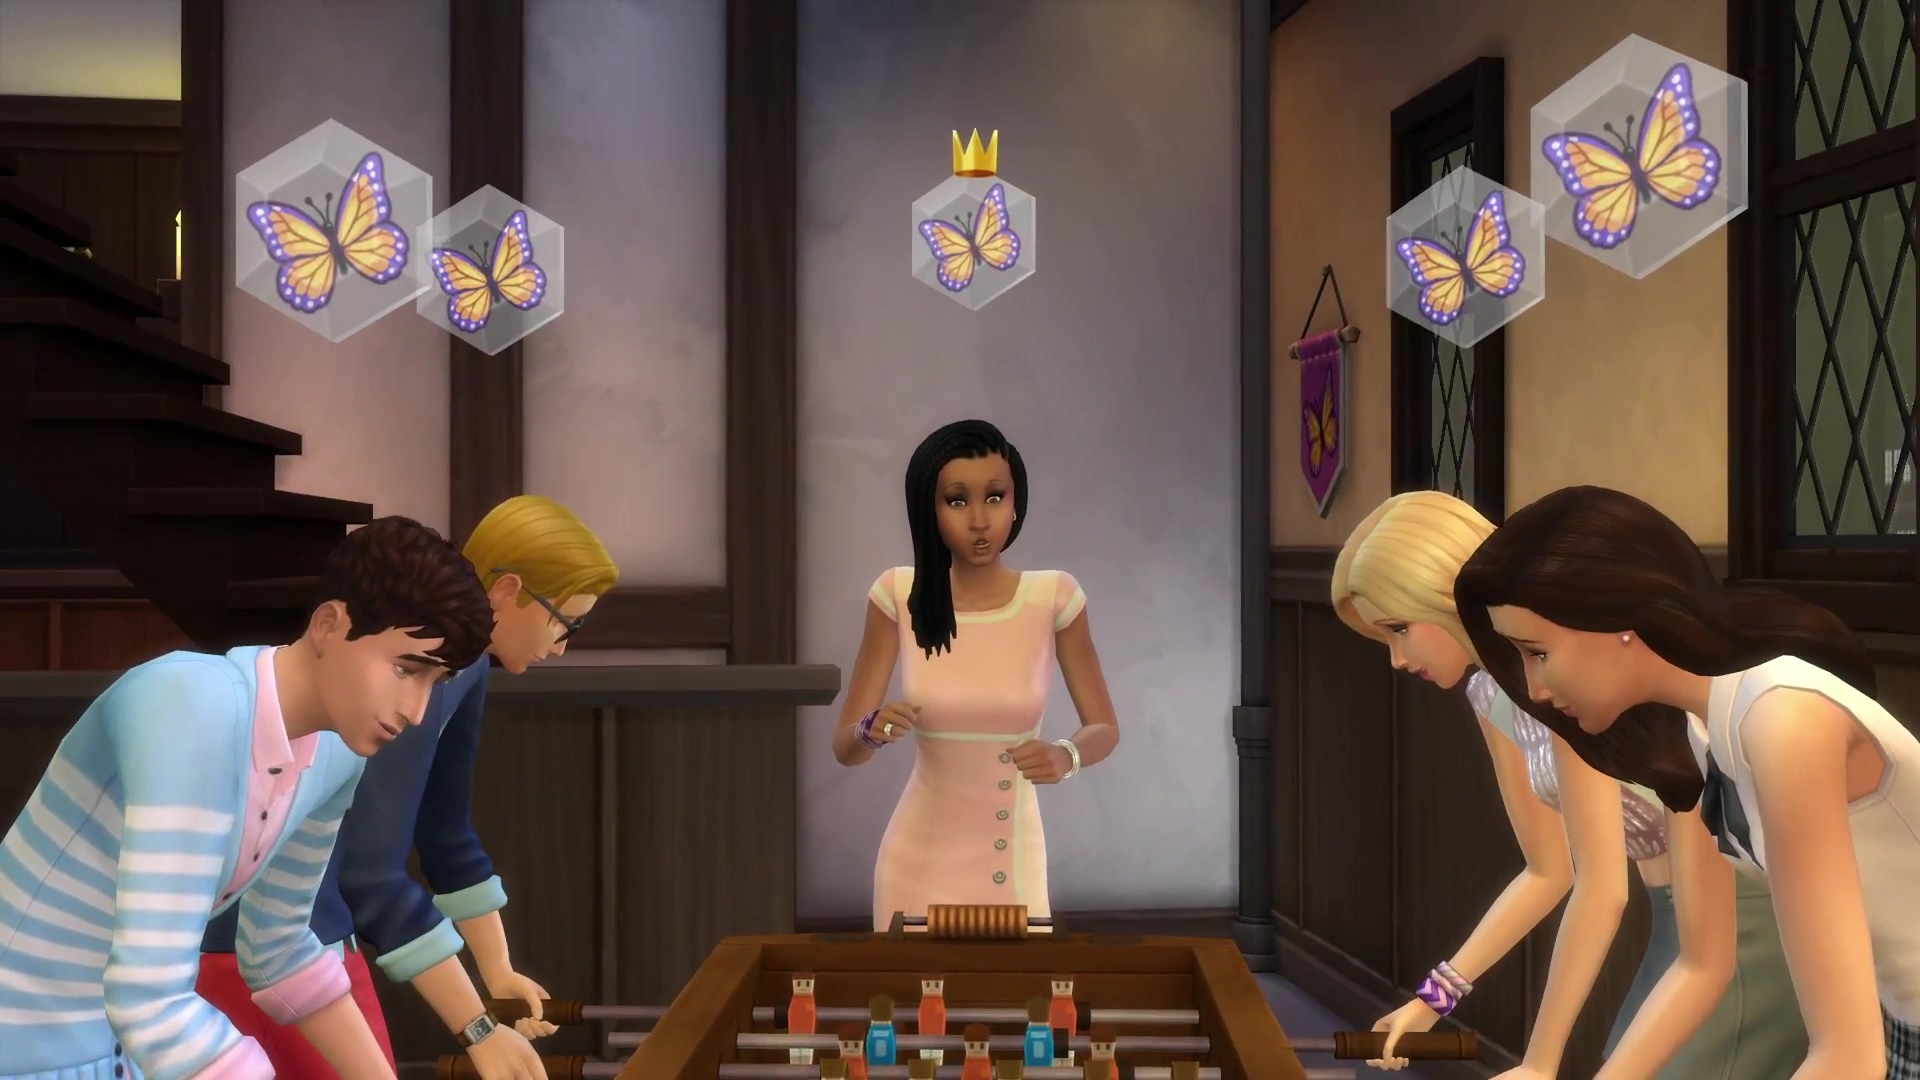 Social Club Settings In The Sims 4: Get Together!